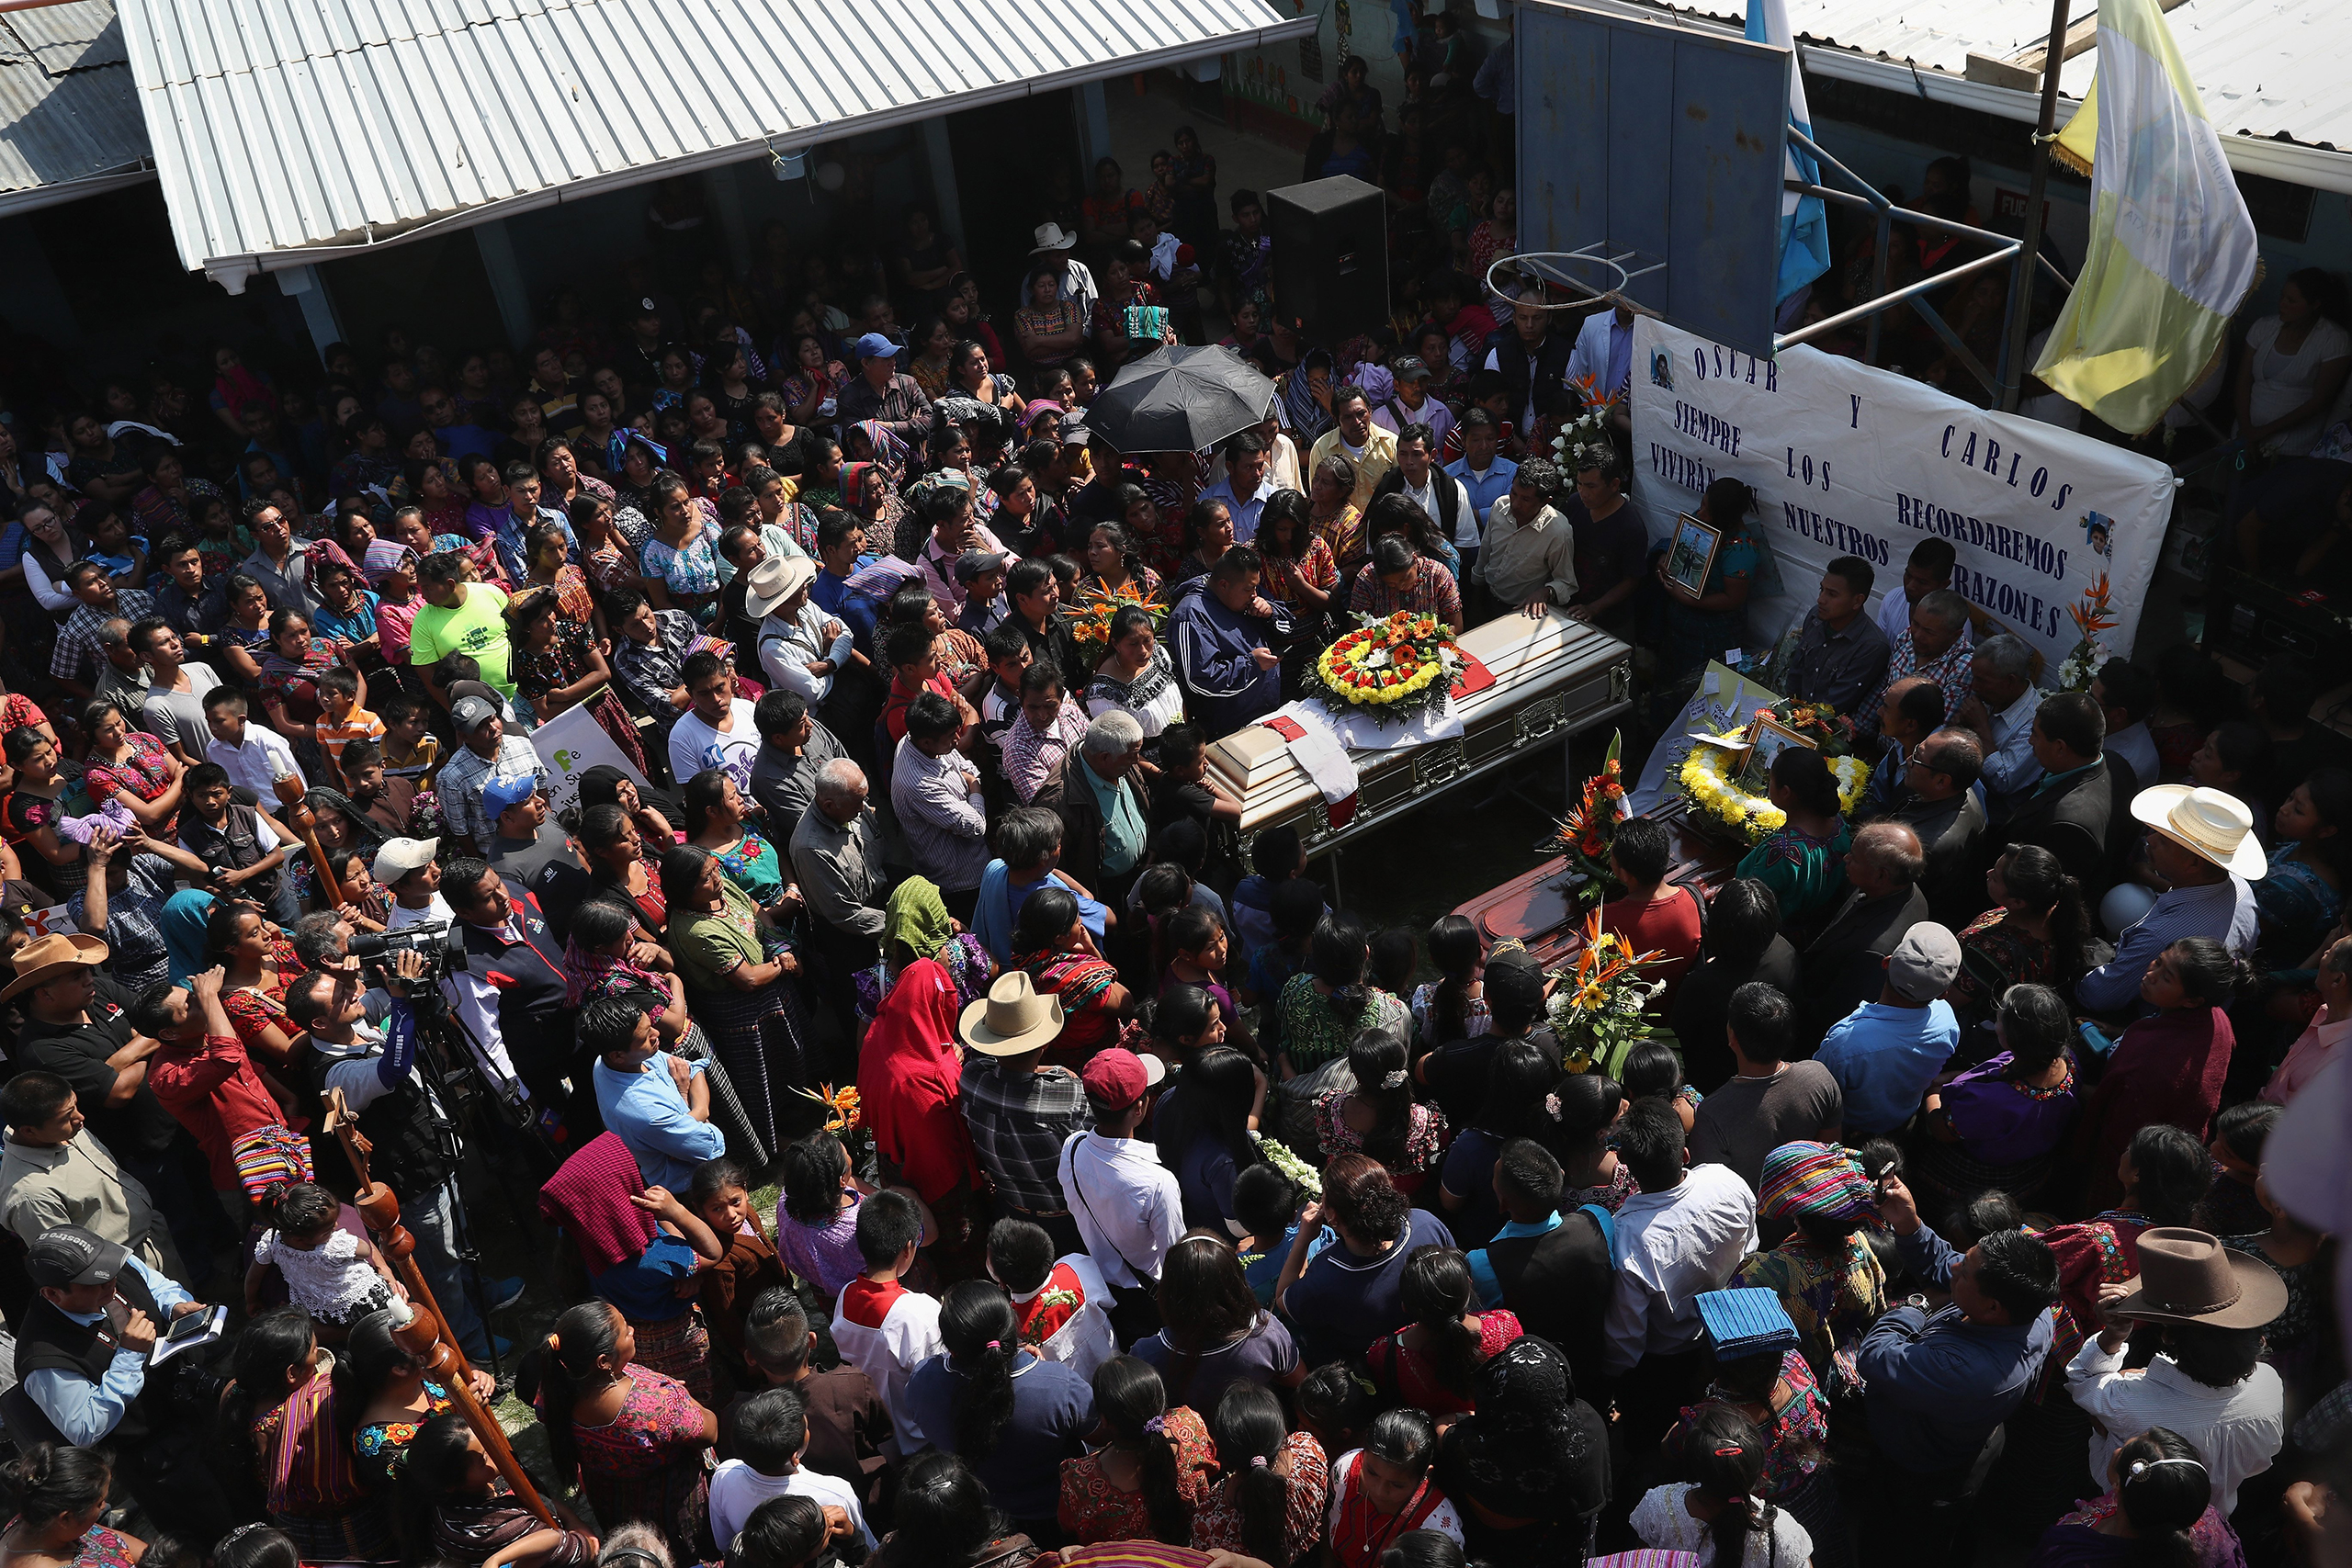 Villagers attend a memorial service held at the elementary school attended by two boys who were kidnapped and killed in San Juan Sacatepéquez on Feb. 14, 2017.